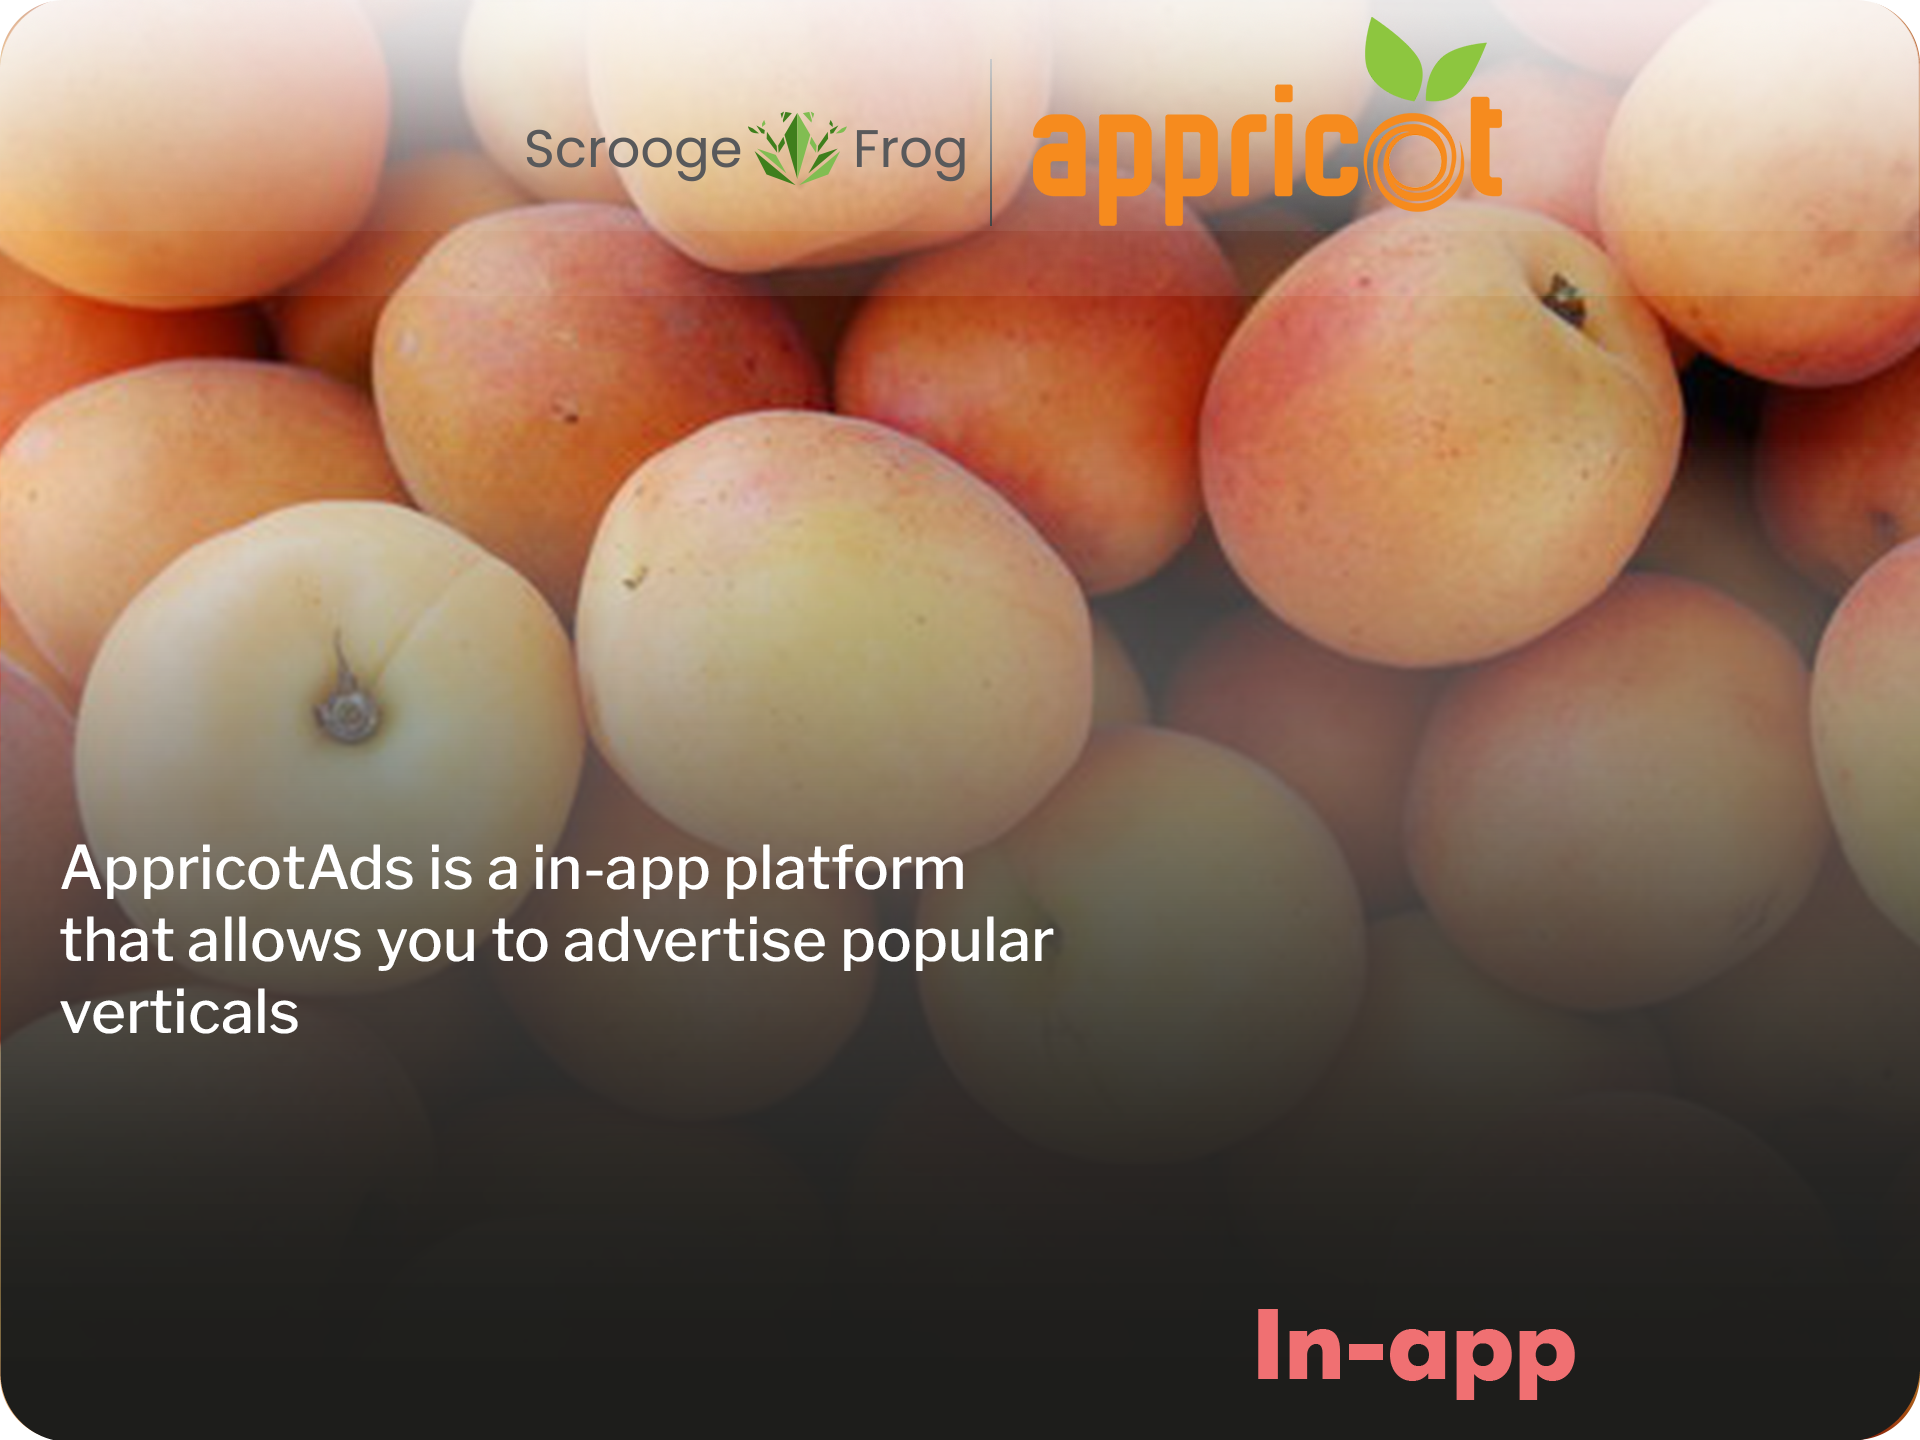 AppricotAds is a in-app platform that allows you to advertise popular verticals